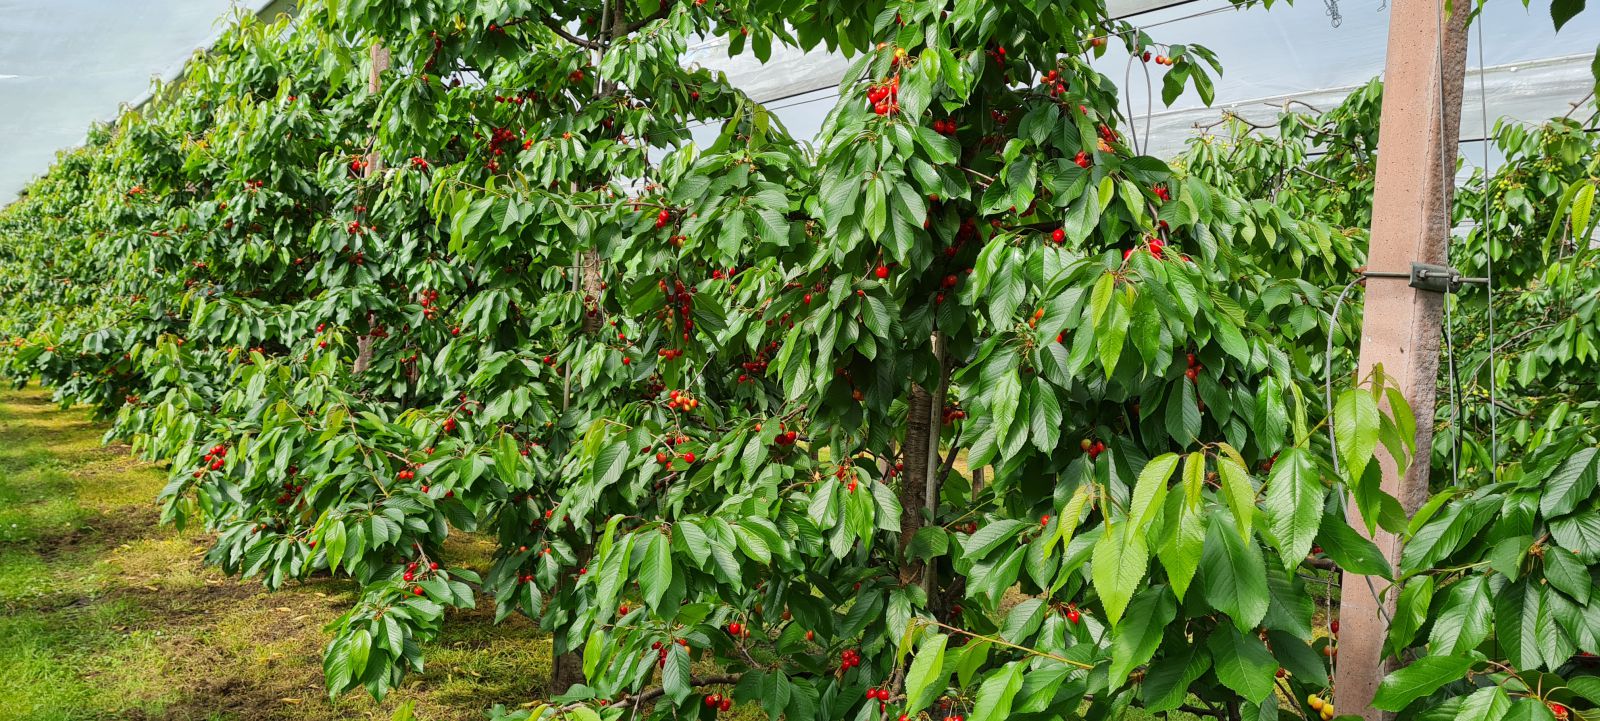 Cultivation systems for cherries